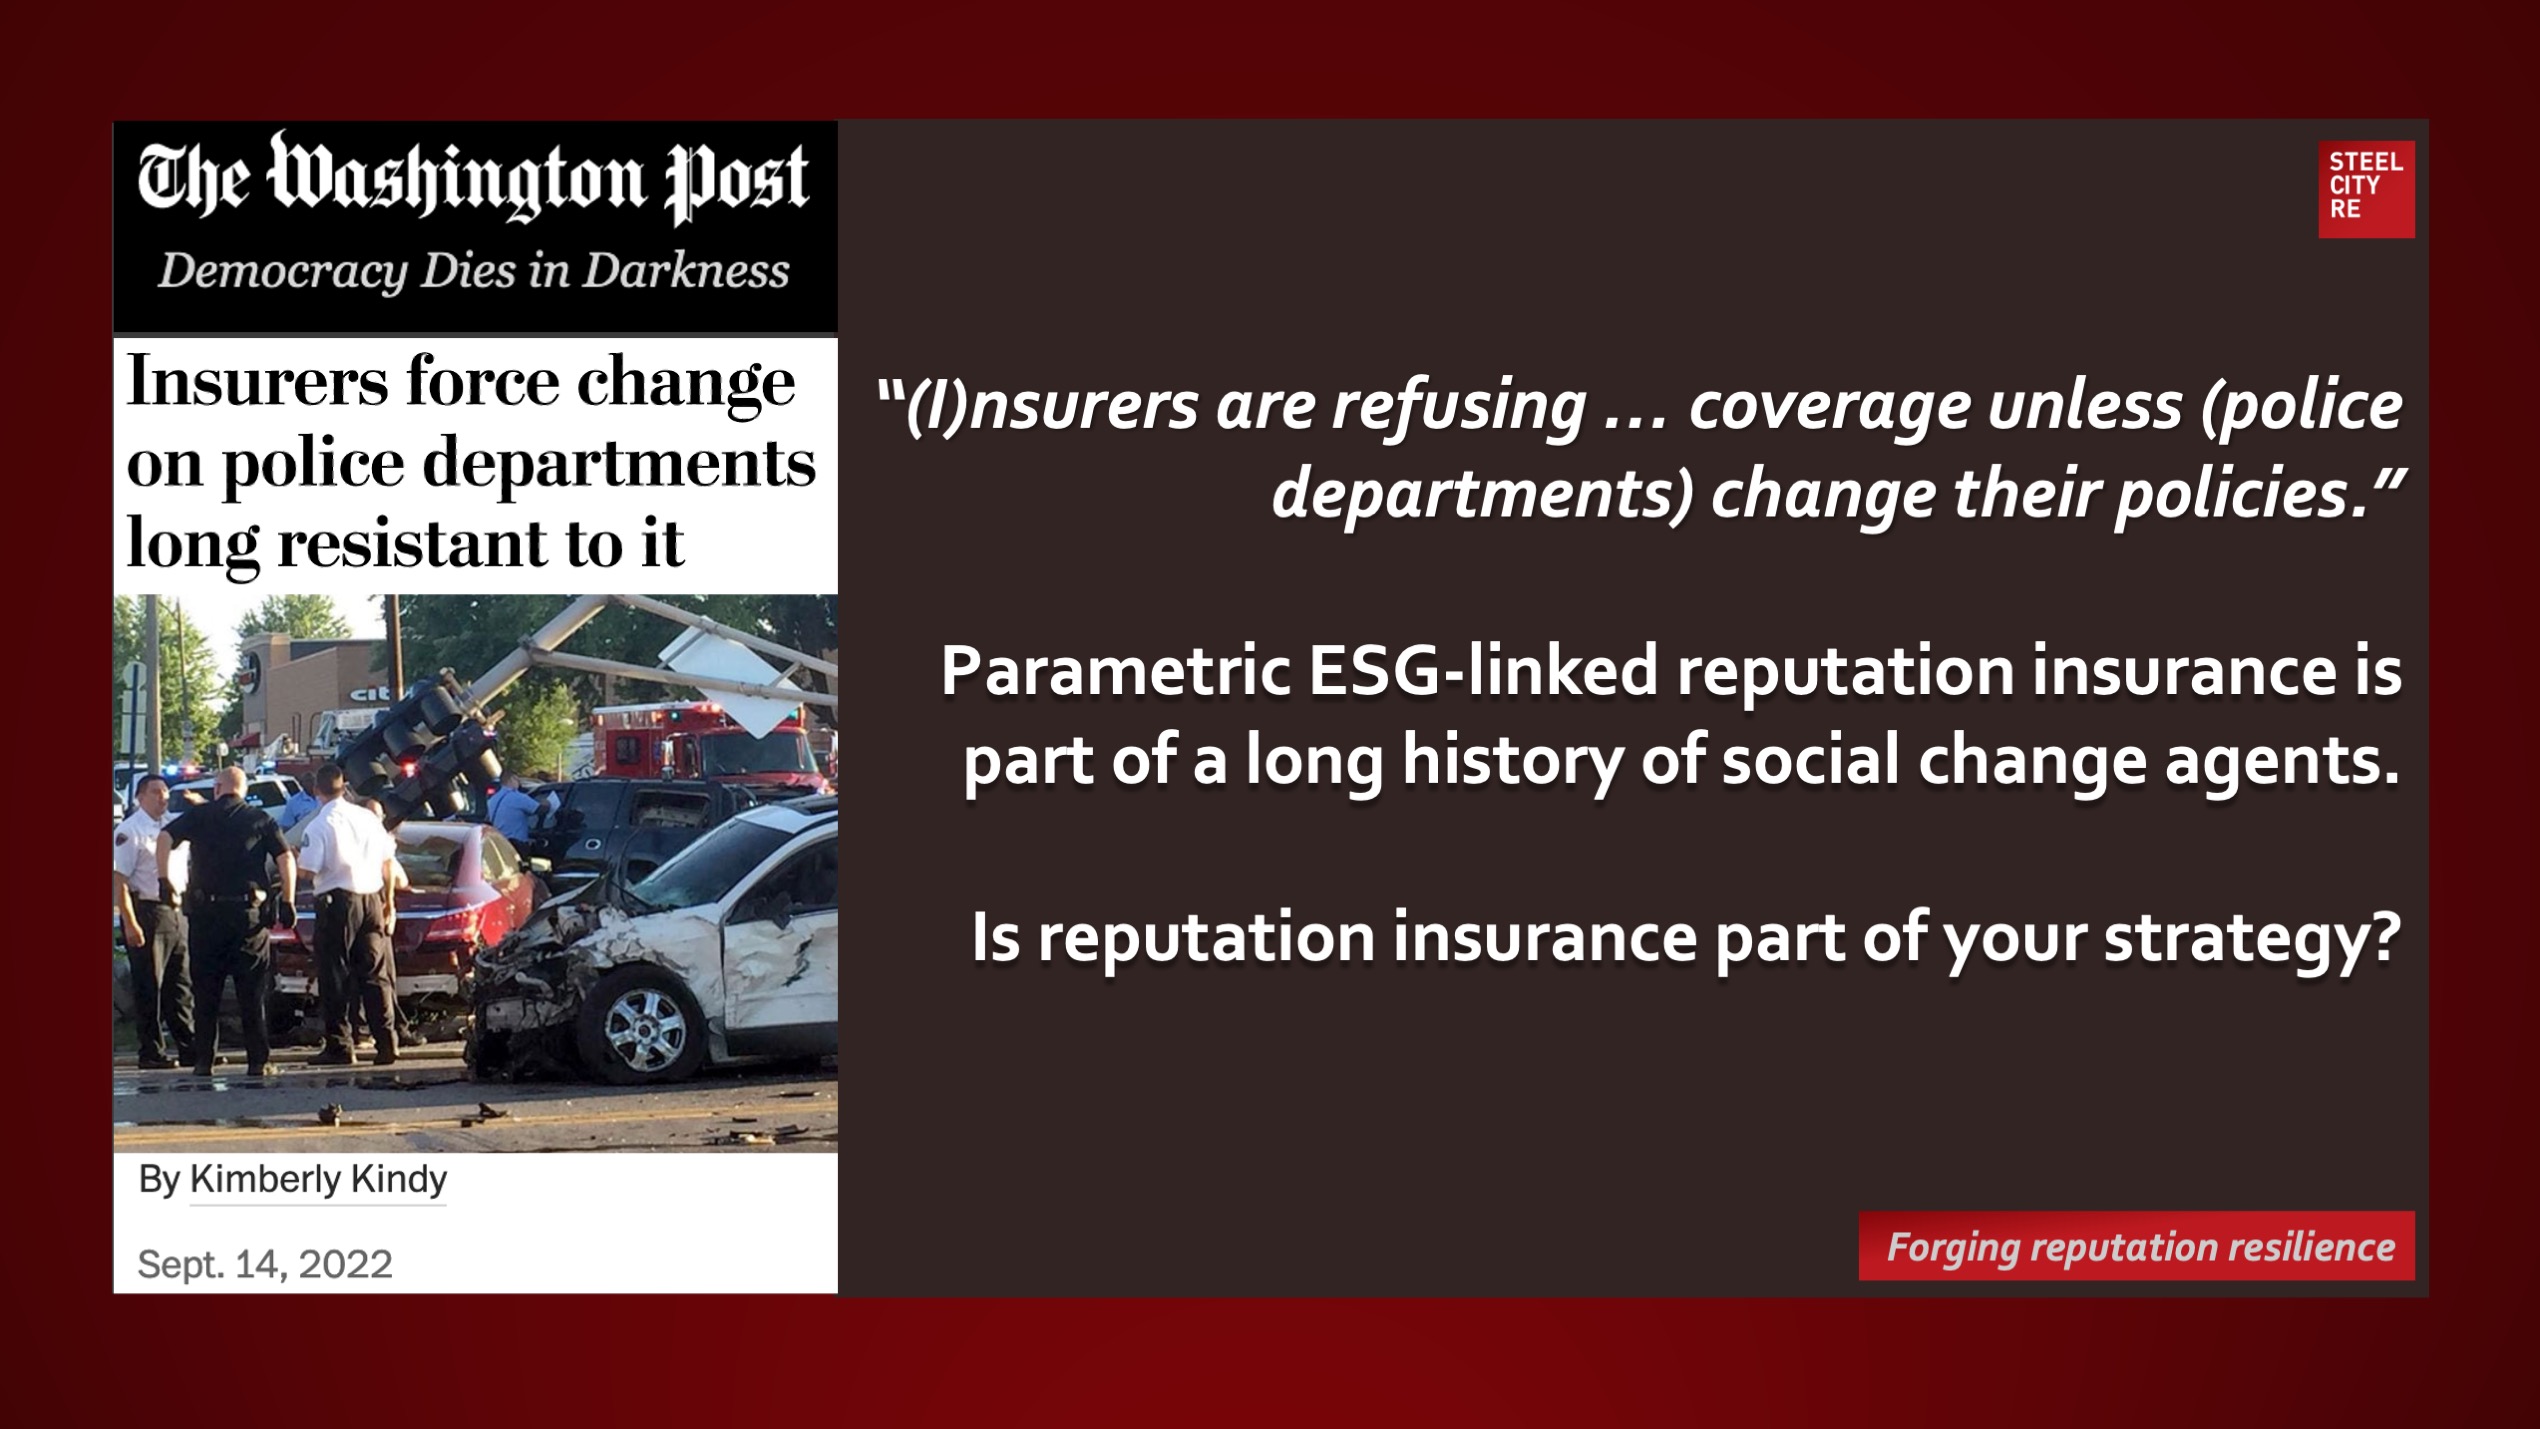 Insurance Drives ESG Adoption. Insurance has long been an agent of social change.